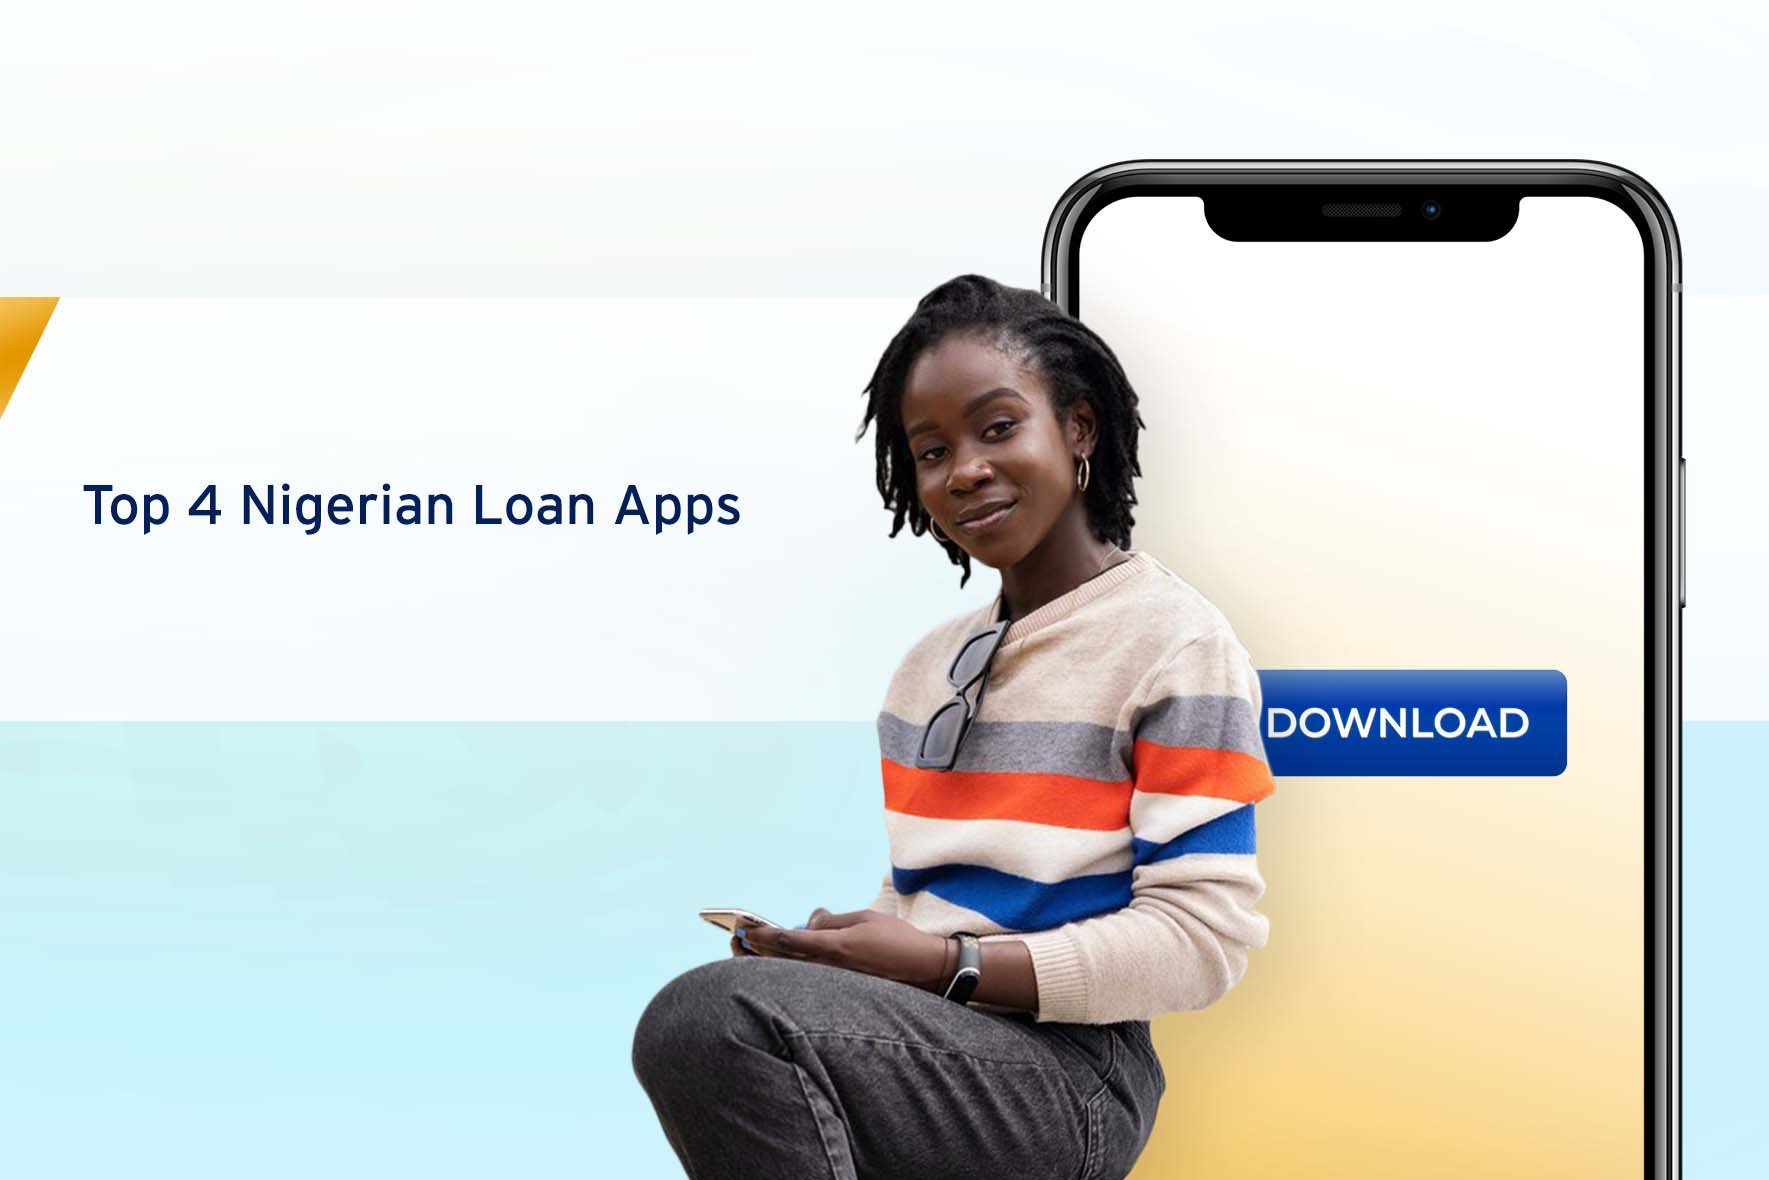 Top 4 Nigerian Loan Apps cover